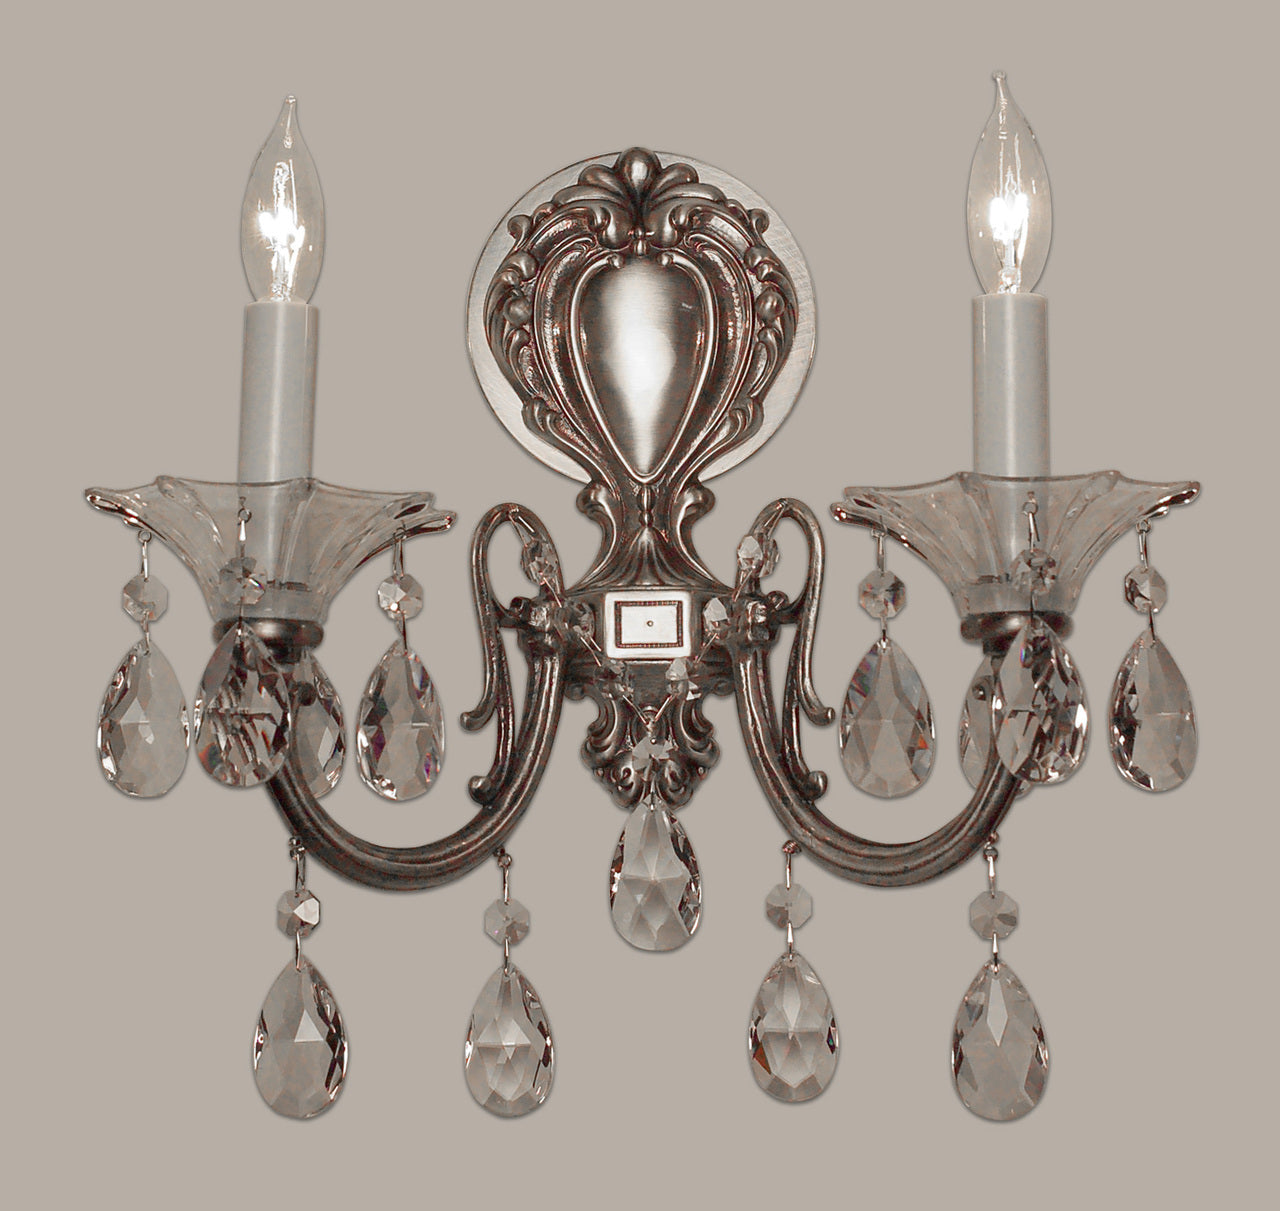 Classic Lighting 57052 MS CBK Via Lombardi Crystal Wall Sconce in Millennium Silver (Imported from Spain)